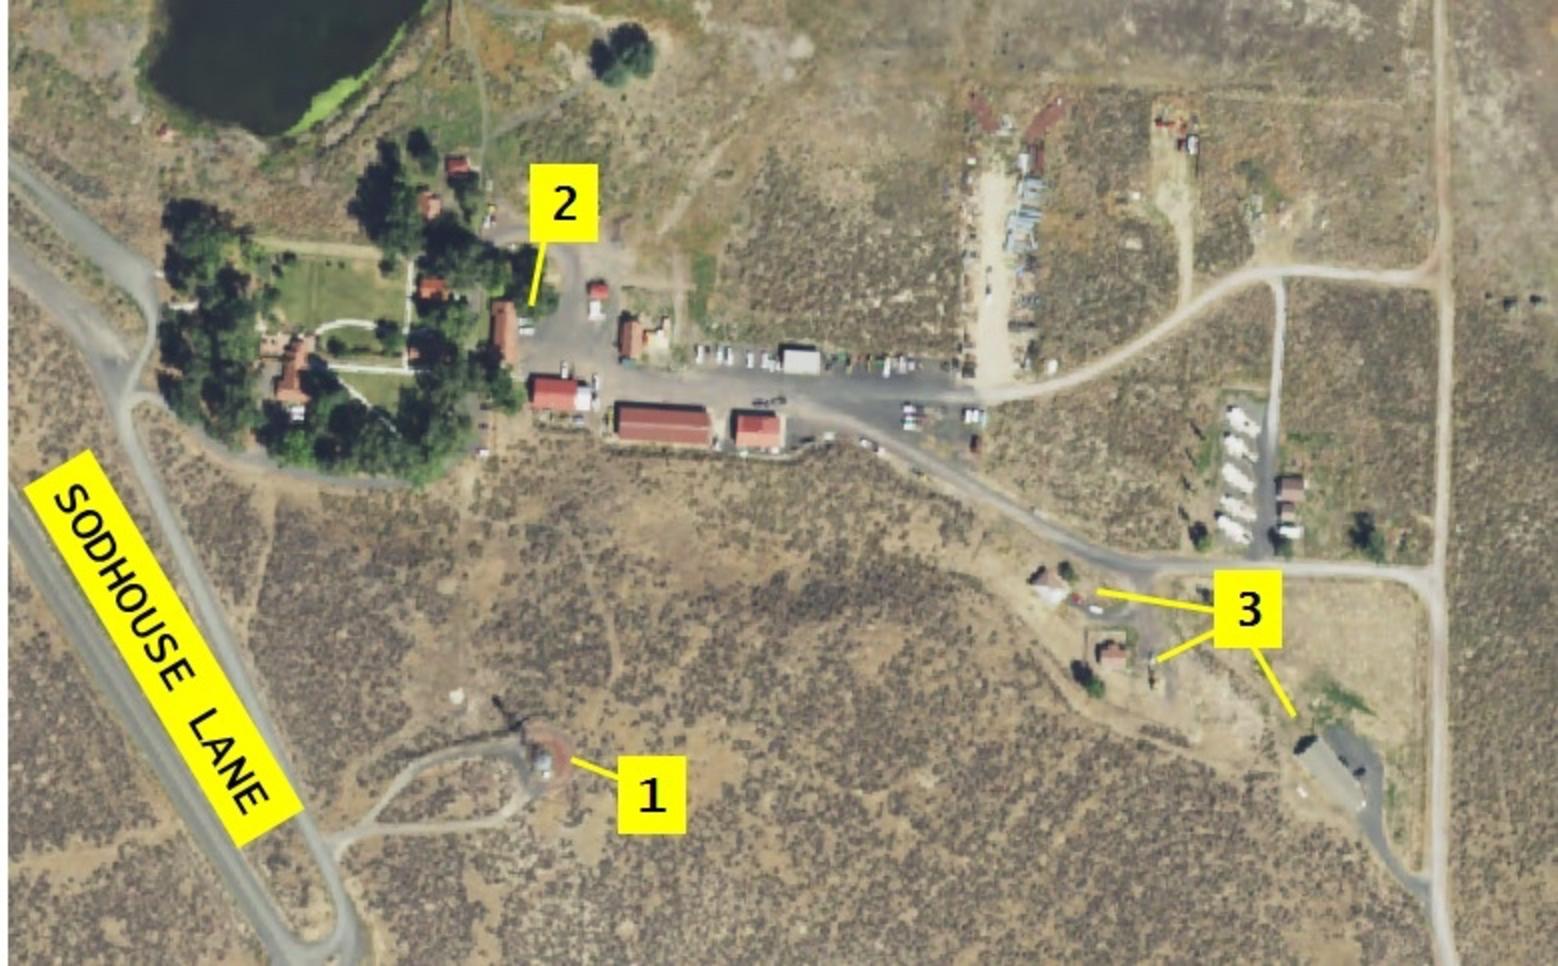 Satellite image of Malheur National Wildlife Refuge in Oregon, site of an armed standoff of militants in 2016 led by Ammon Bundy and others. Figure 1 show the fire lookout used as a watchtower by those involved with the takeover. Figure two shows the refuges offices used as a headquarters by Bundy and others. Figure three shows the residential buildings used by militants as a barracks and canteen.